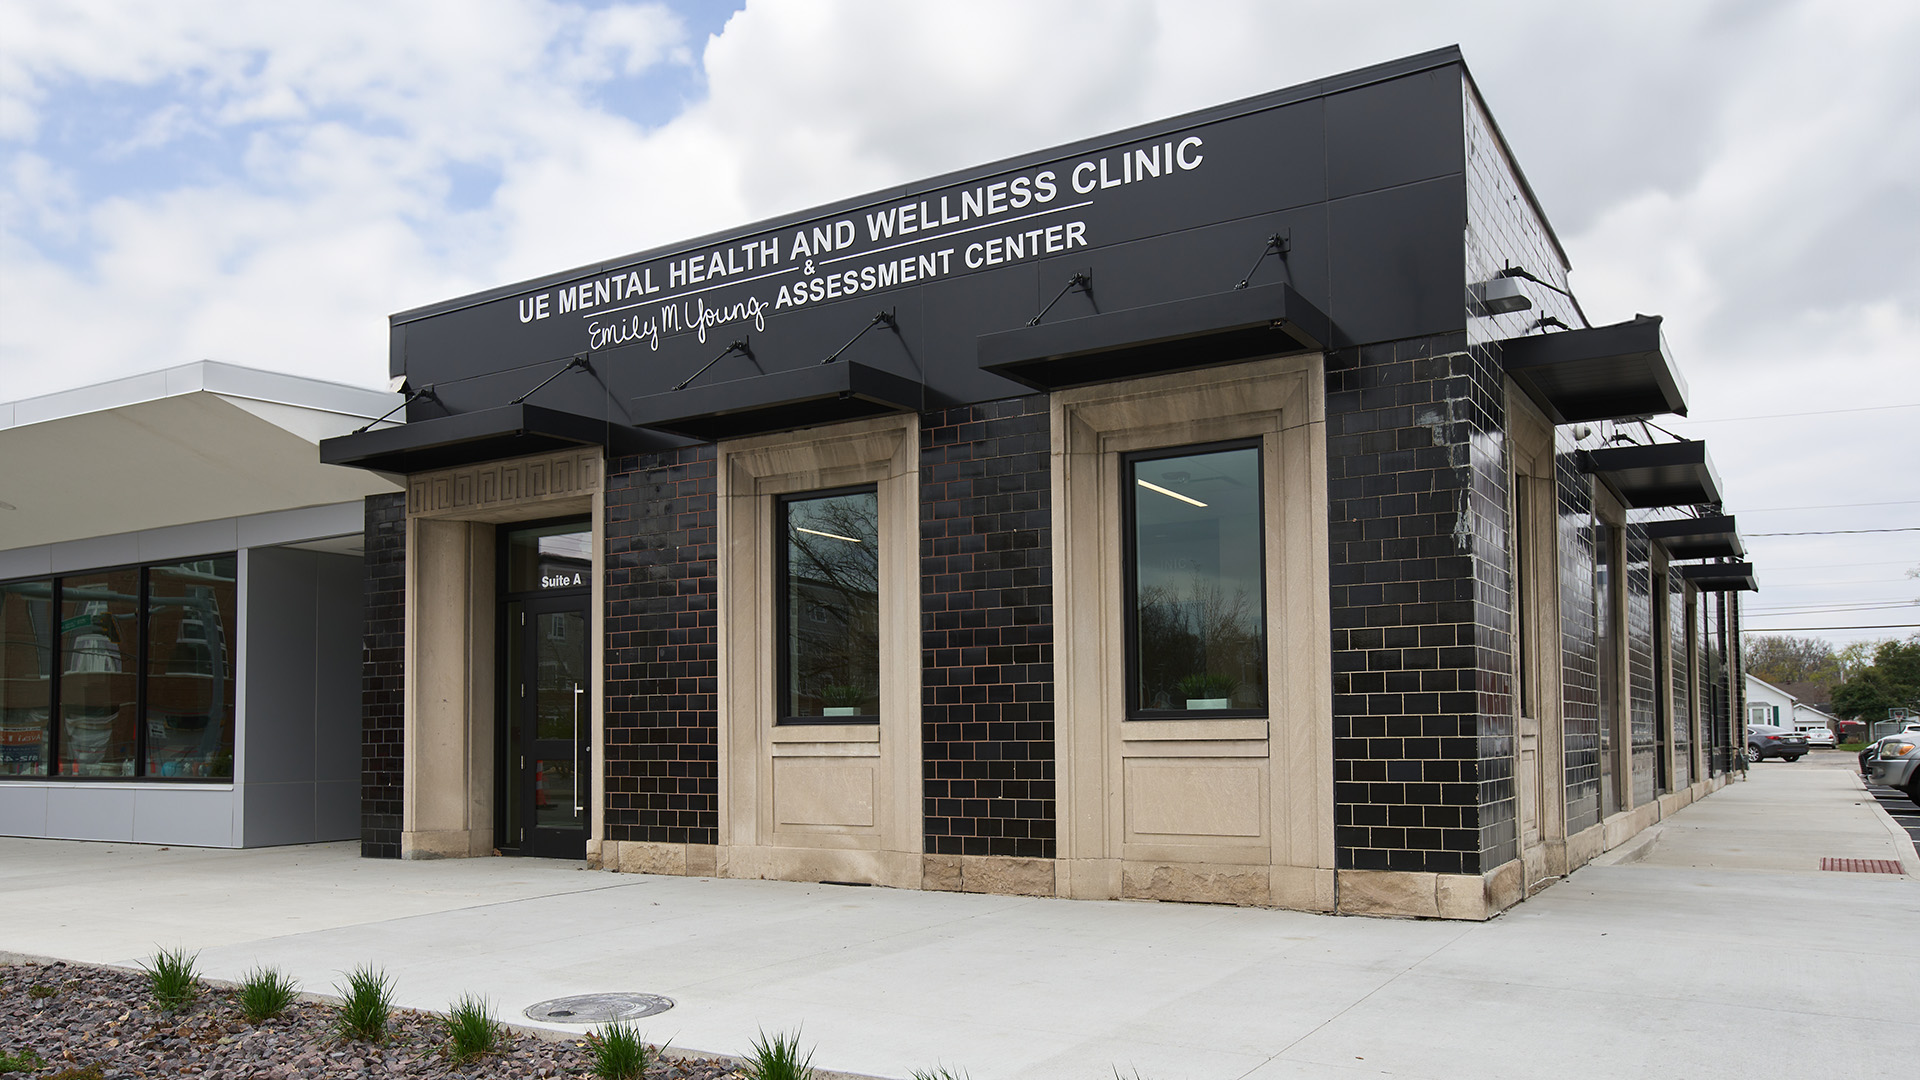 Mental Health and Wellness Clinic in partly cloudy sky